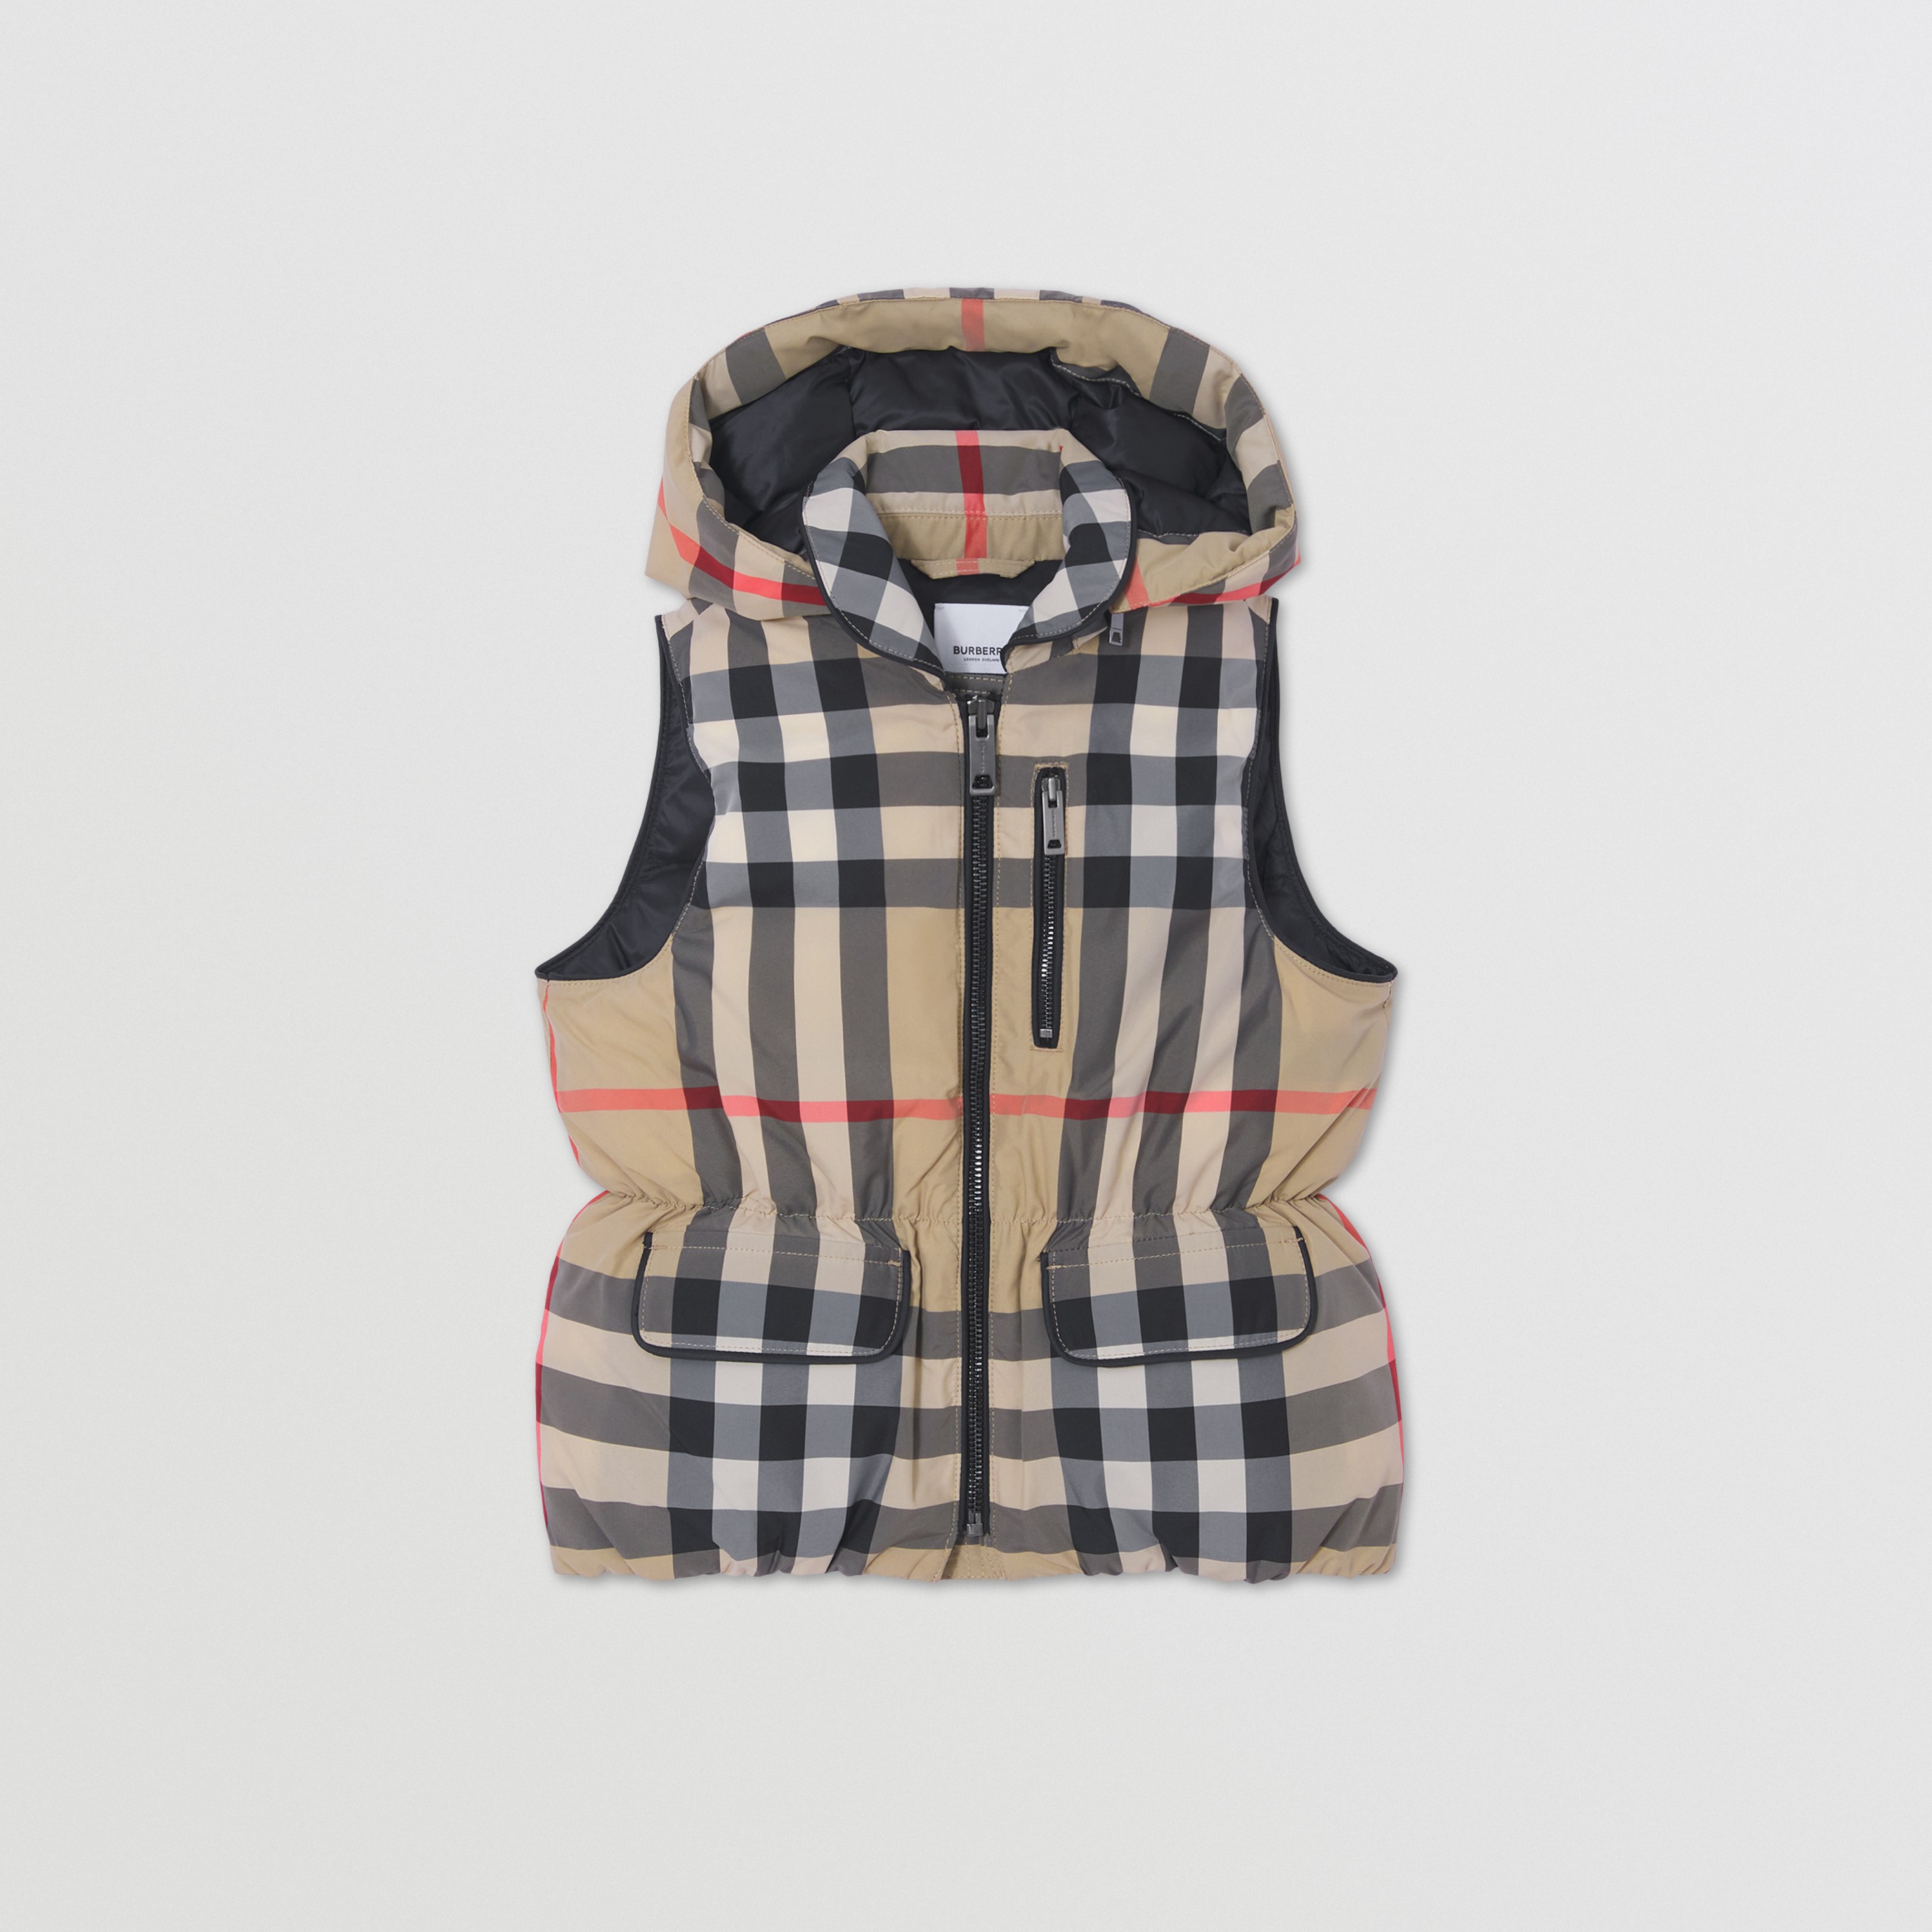 Burberry reversible vest how to make money in forex strategies